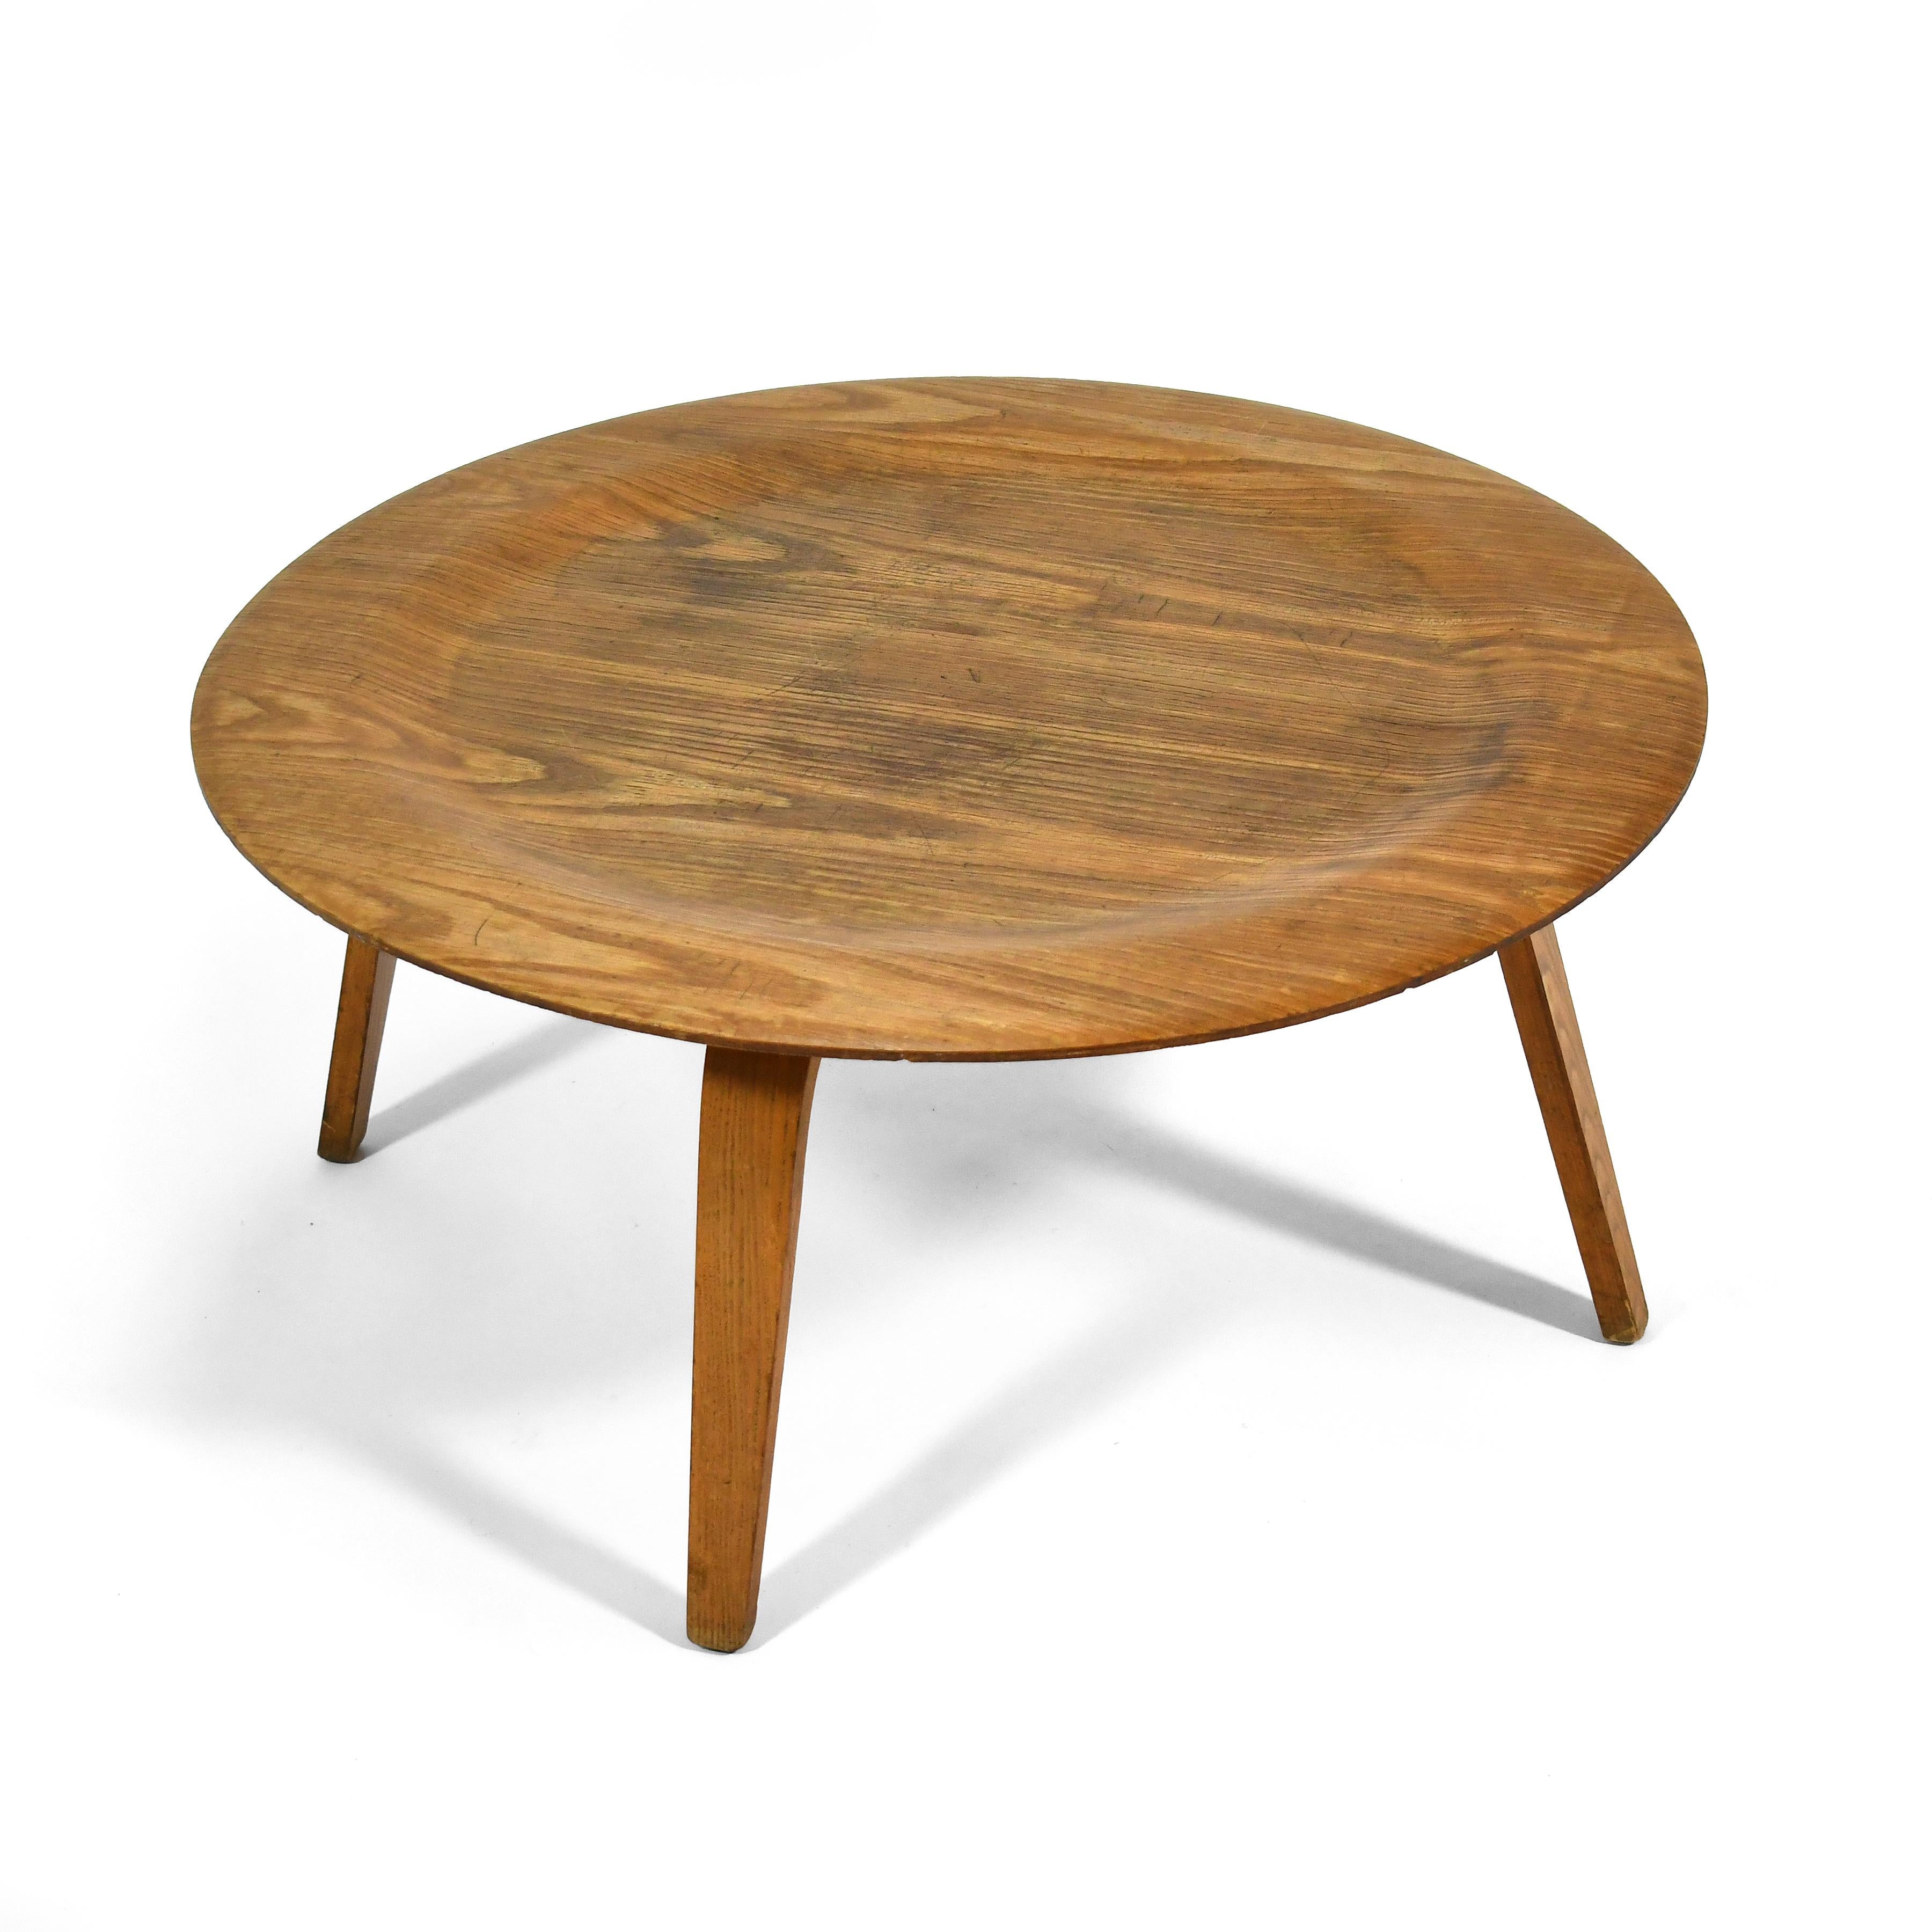 This early vintage coffee table by Charles and Ray Eames is an important and iconic design. The result of the couple's experiments in molded plywood, the table is visually and physically light, while still surprisingly strong. This early 1950s